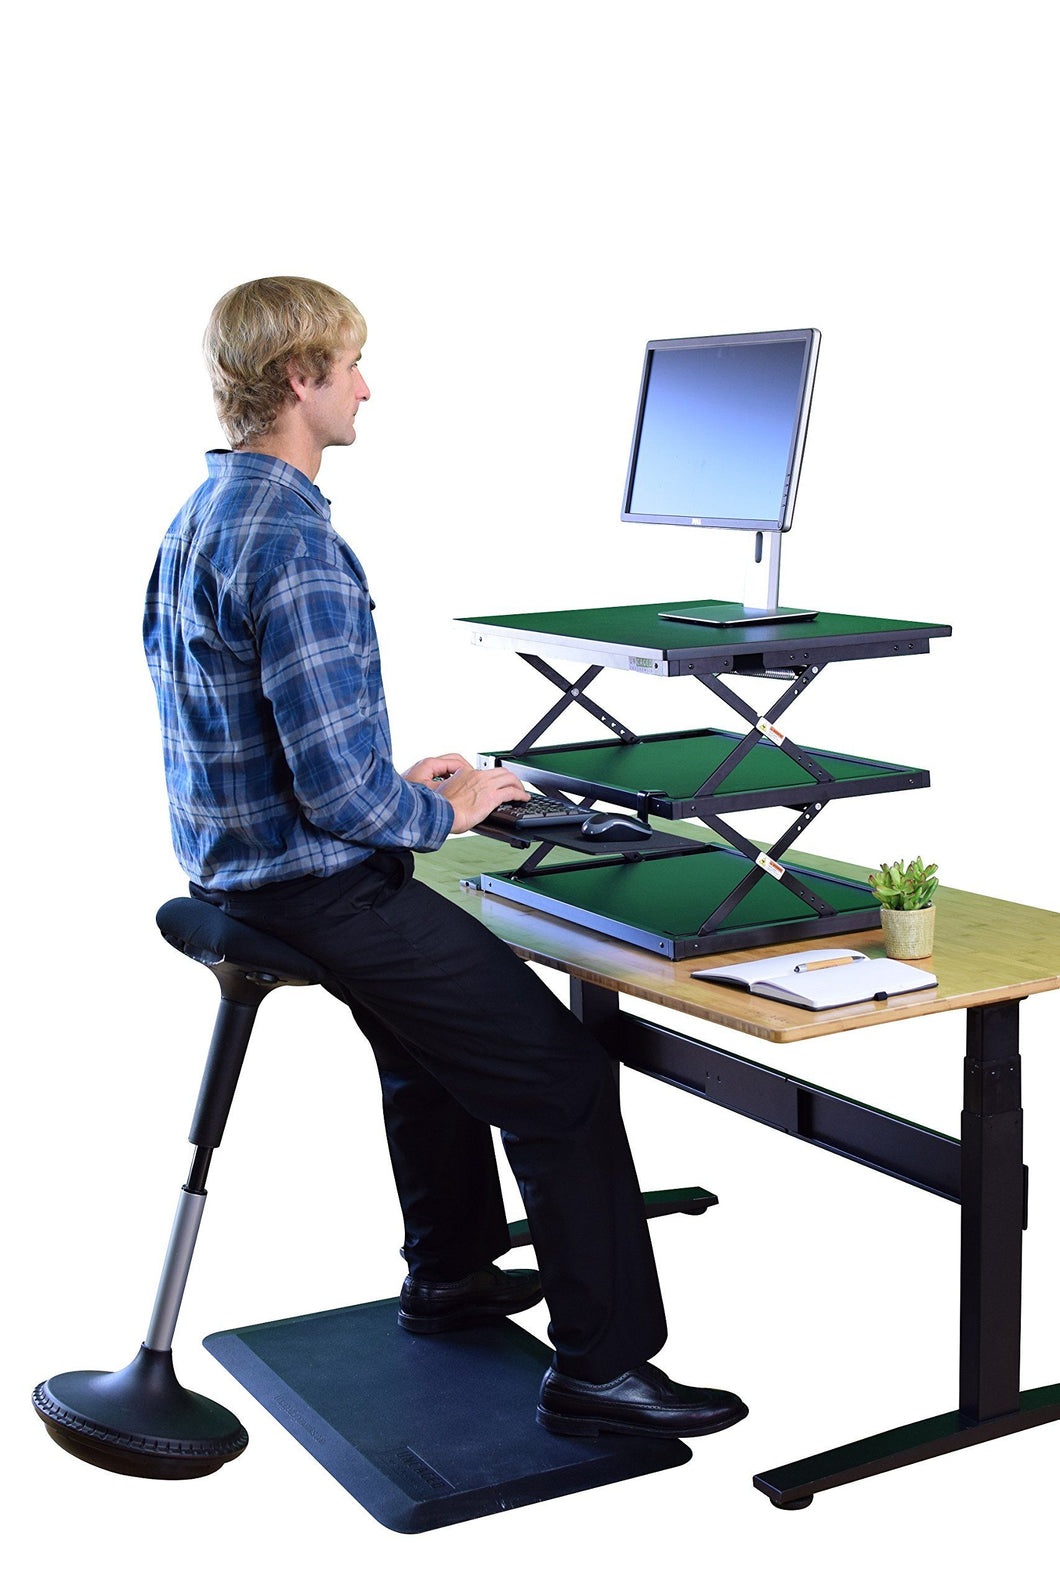 Sit-Stand Wobble stool